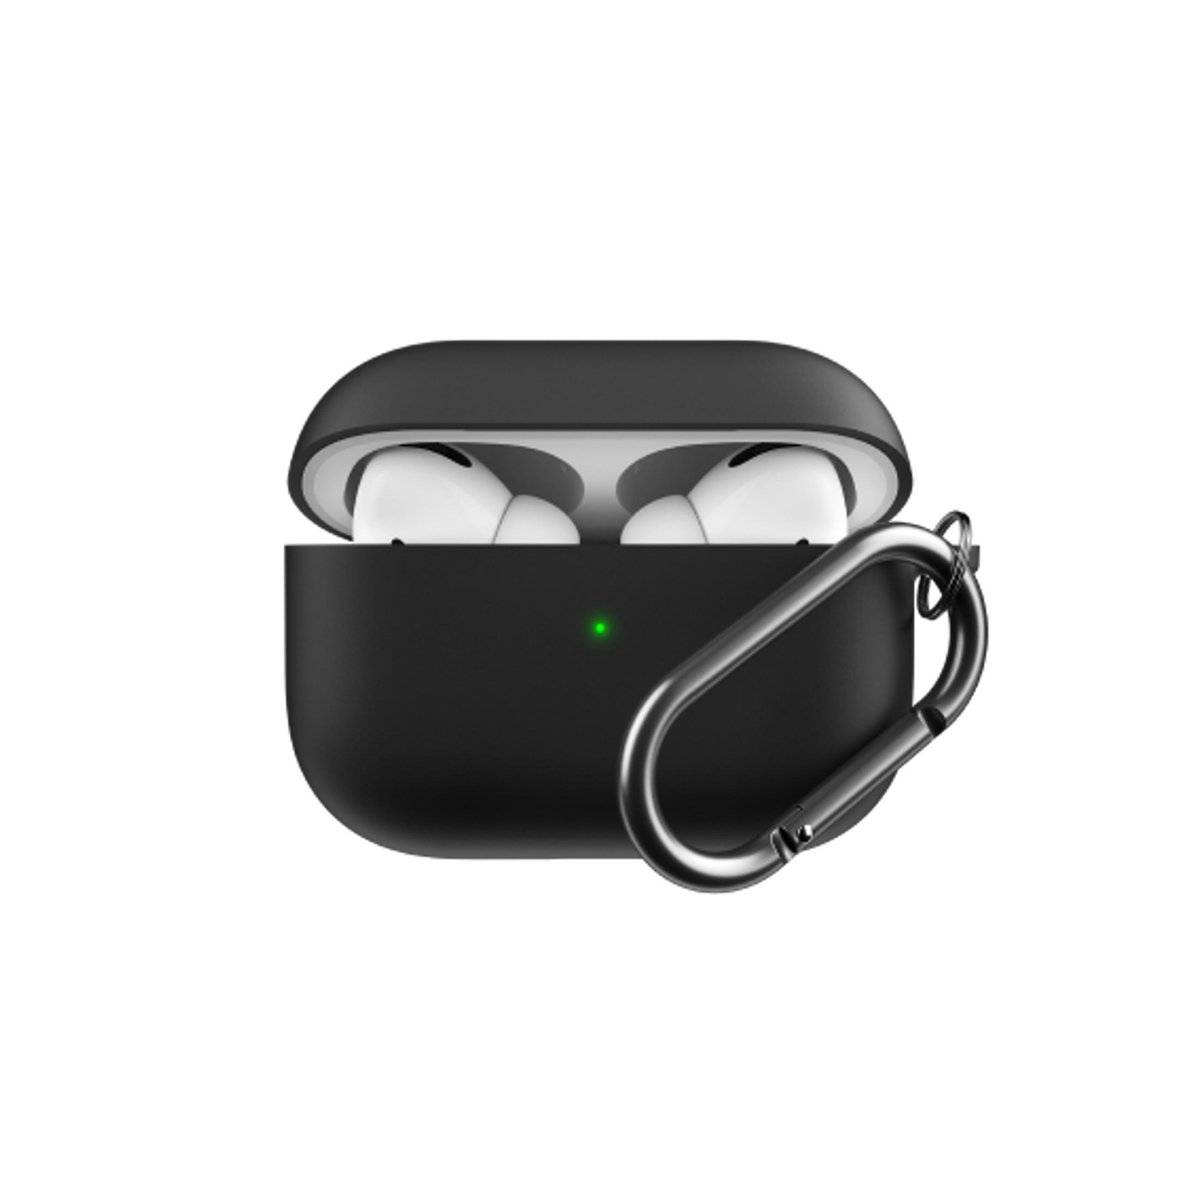 KeyBudz HybridShell Series AirPods Pro Soft Case with Keychain - Wristband, Wireless charging compatible, Black